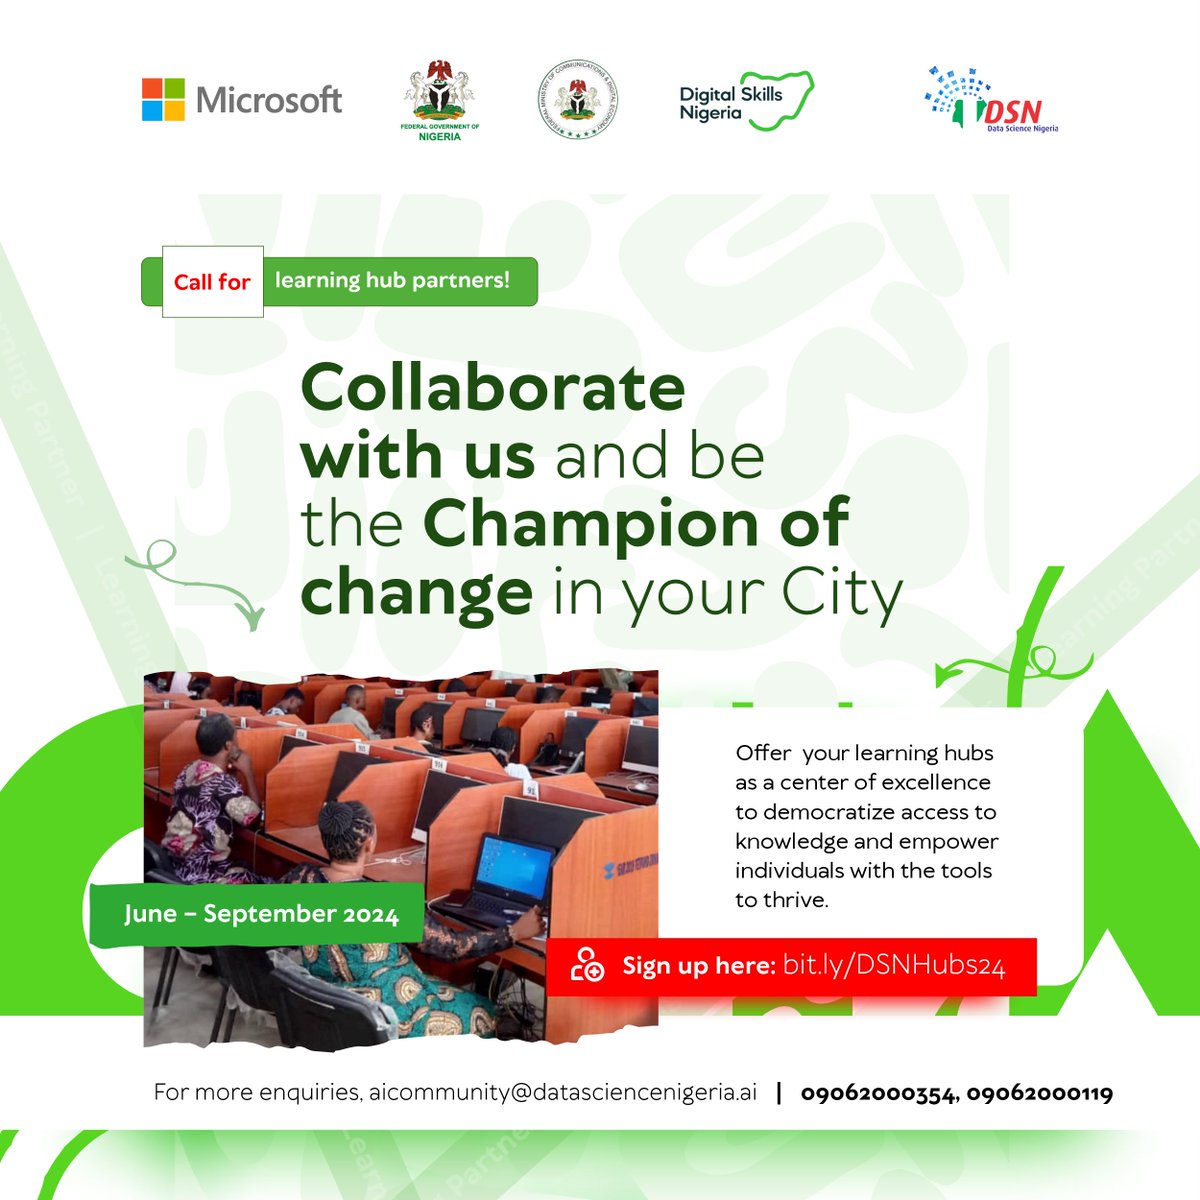 Turn your learning center into a Hub of Innovation! Do you have a conducive learning space for 50+ people in any Nigerian city? Be a catalyst for learning and bring AI education to your community. Click here to register:bit.ly/DSNHubs24